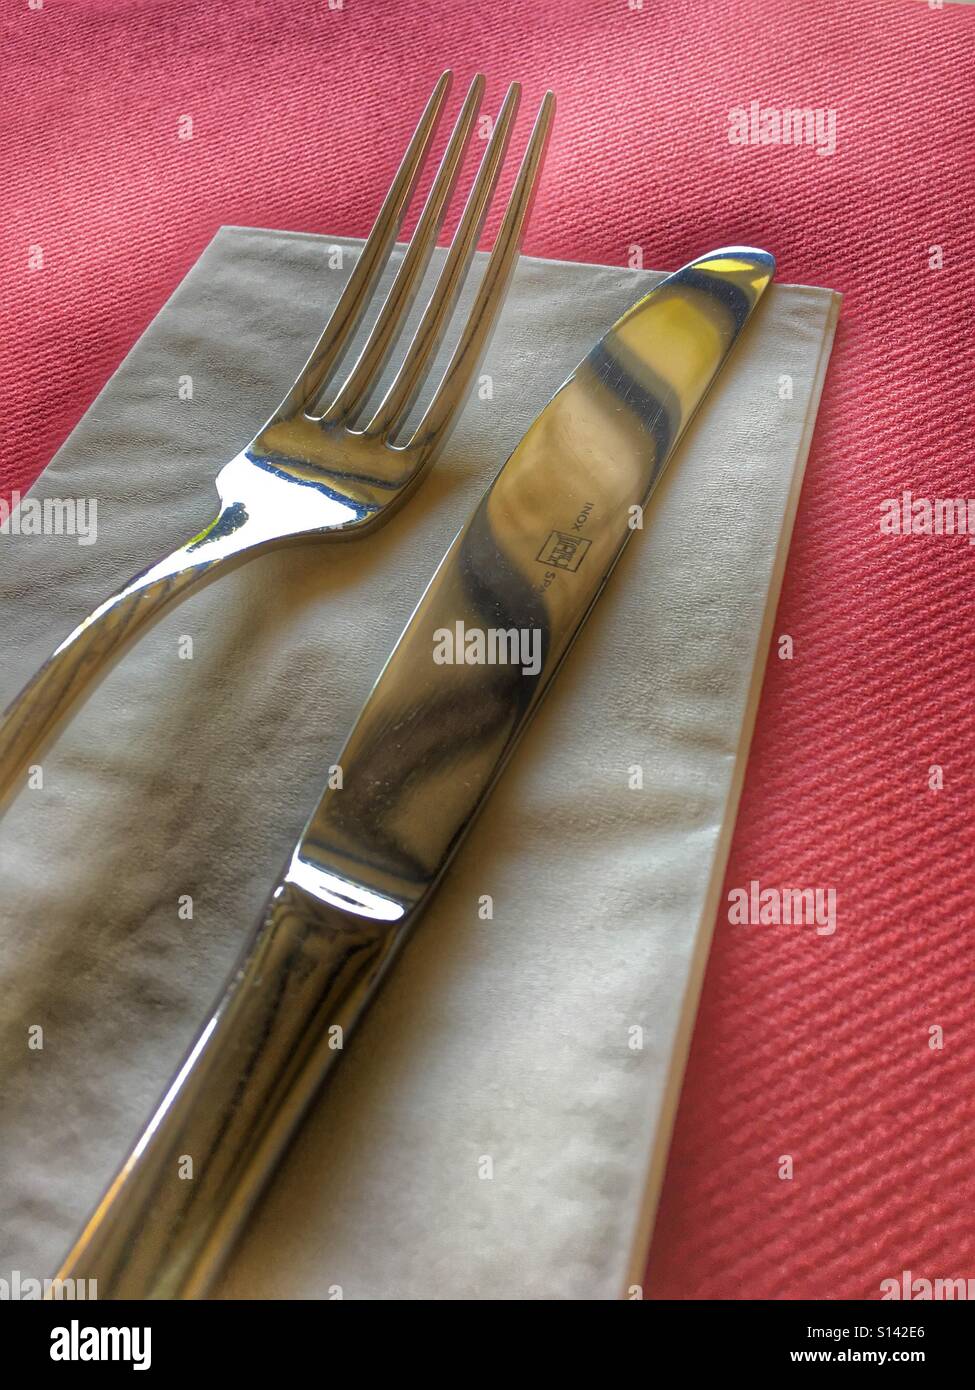 Knife and fork on a serviette. Stock Photo